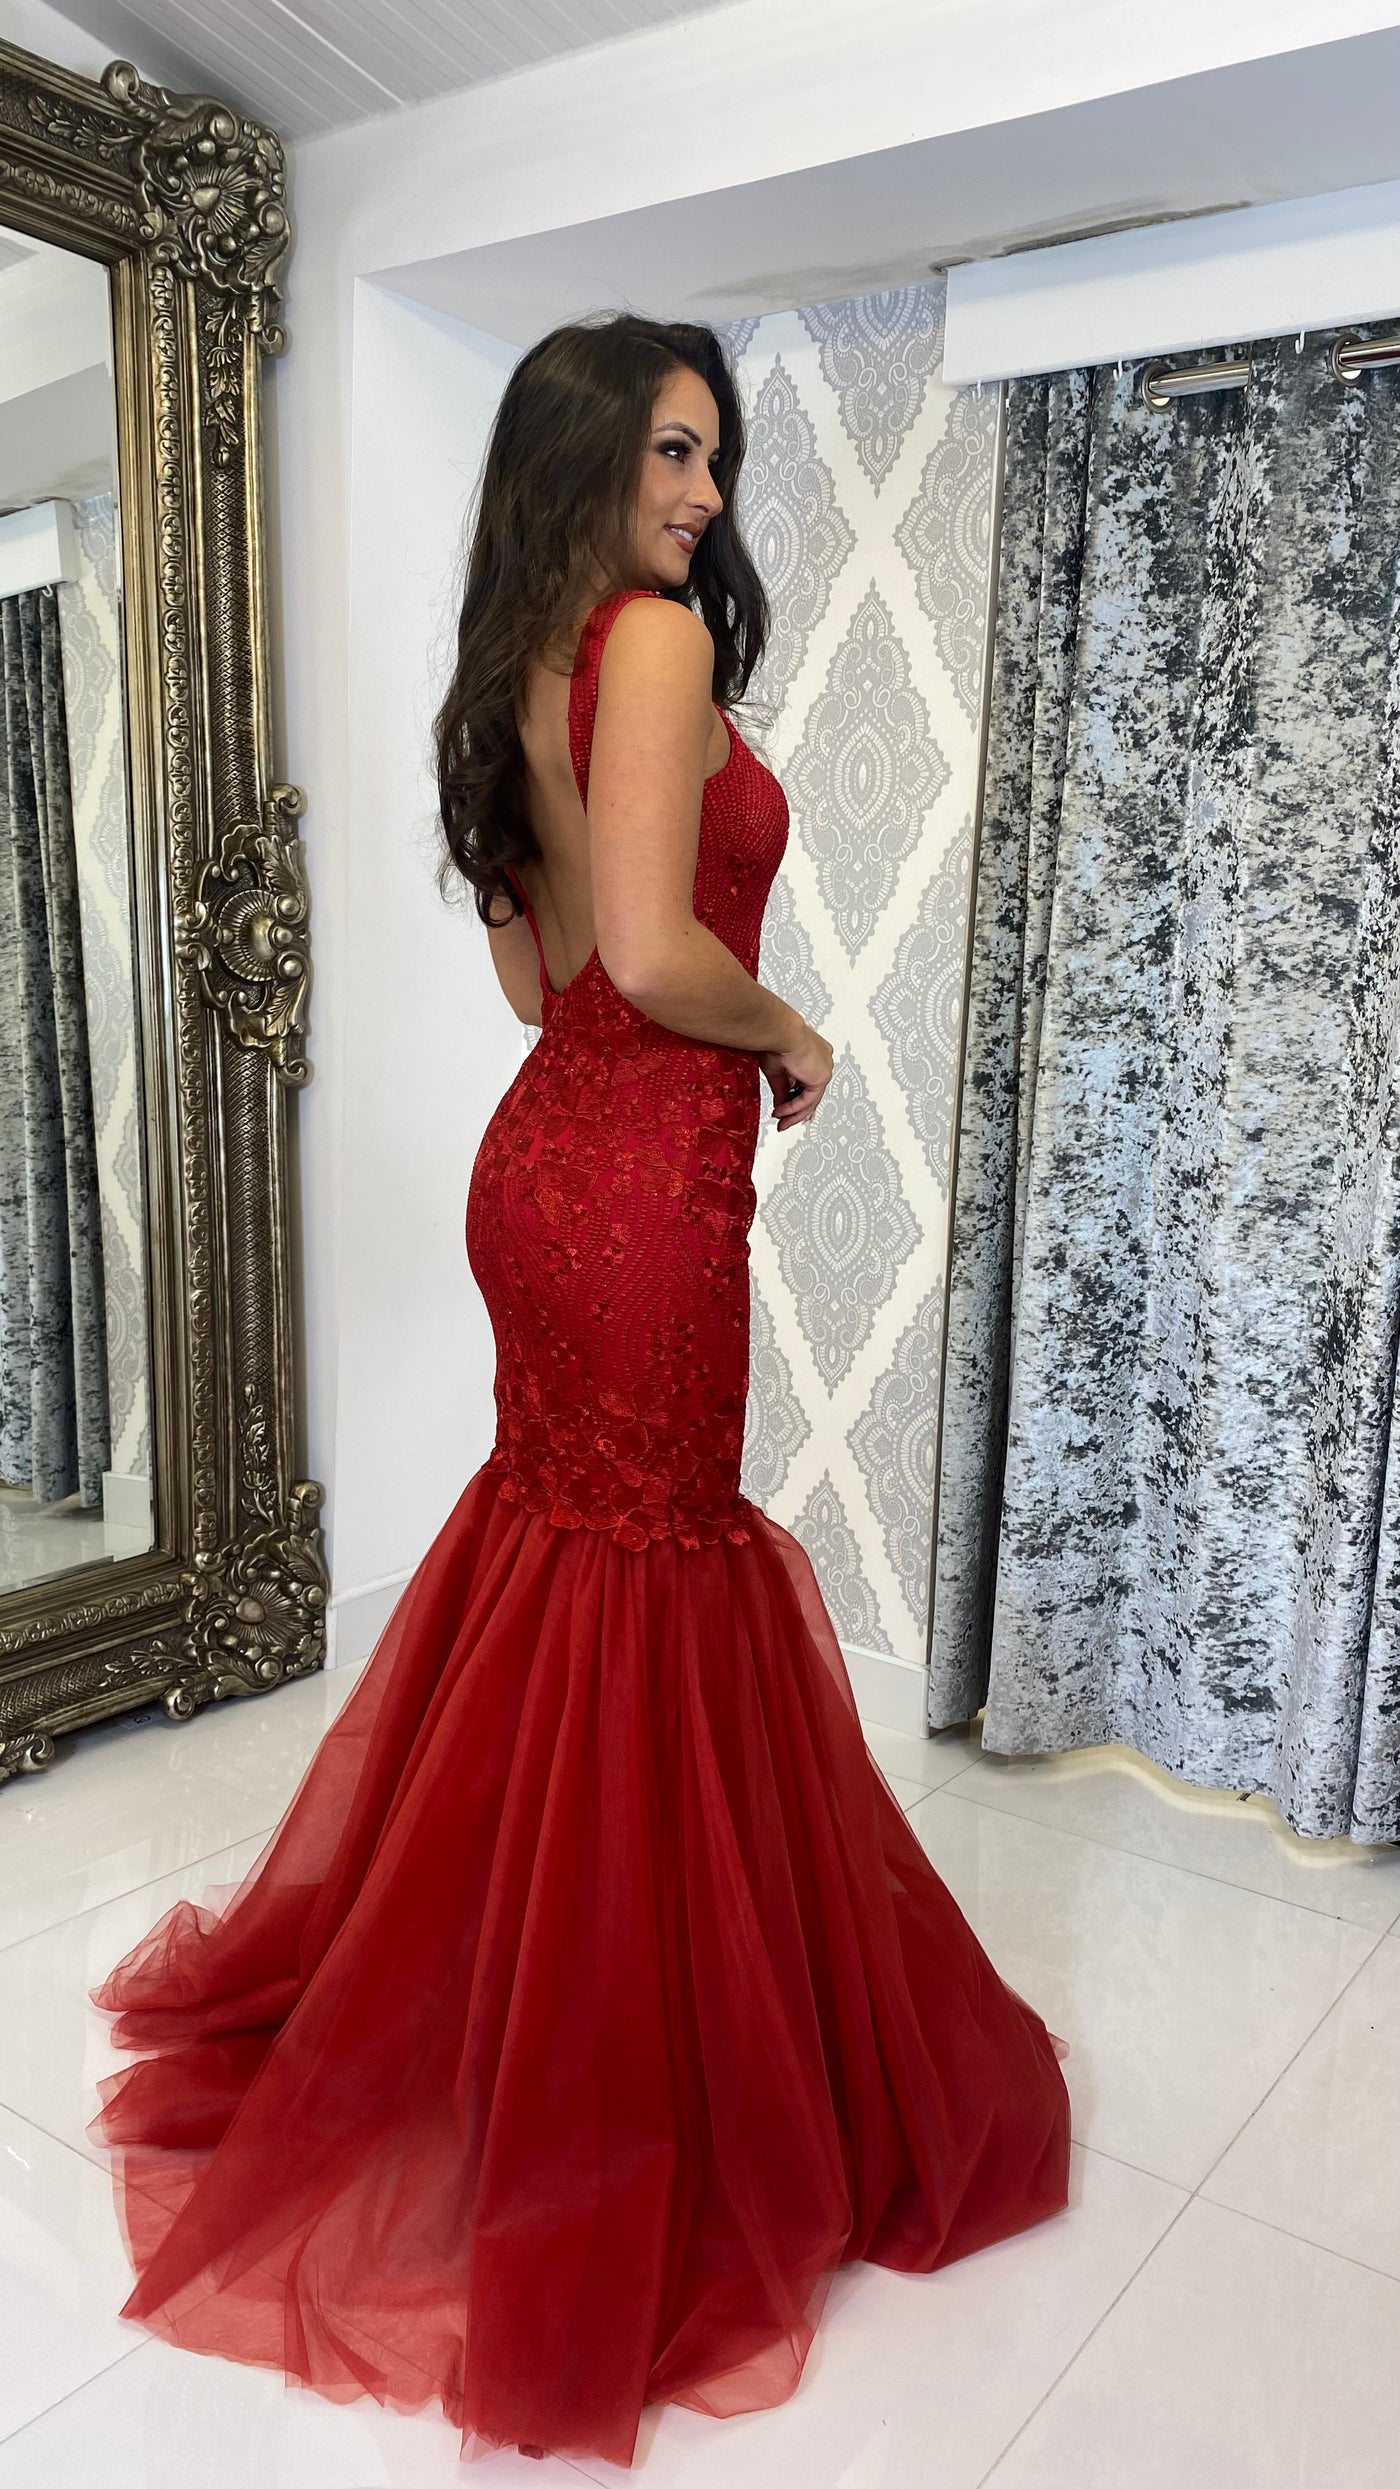 Red Lace High Neck Backless Fishtail Evening Gown